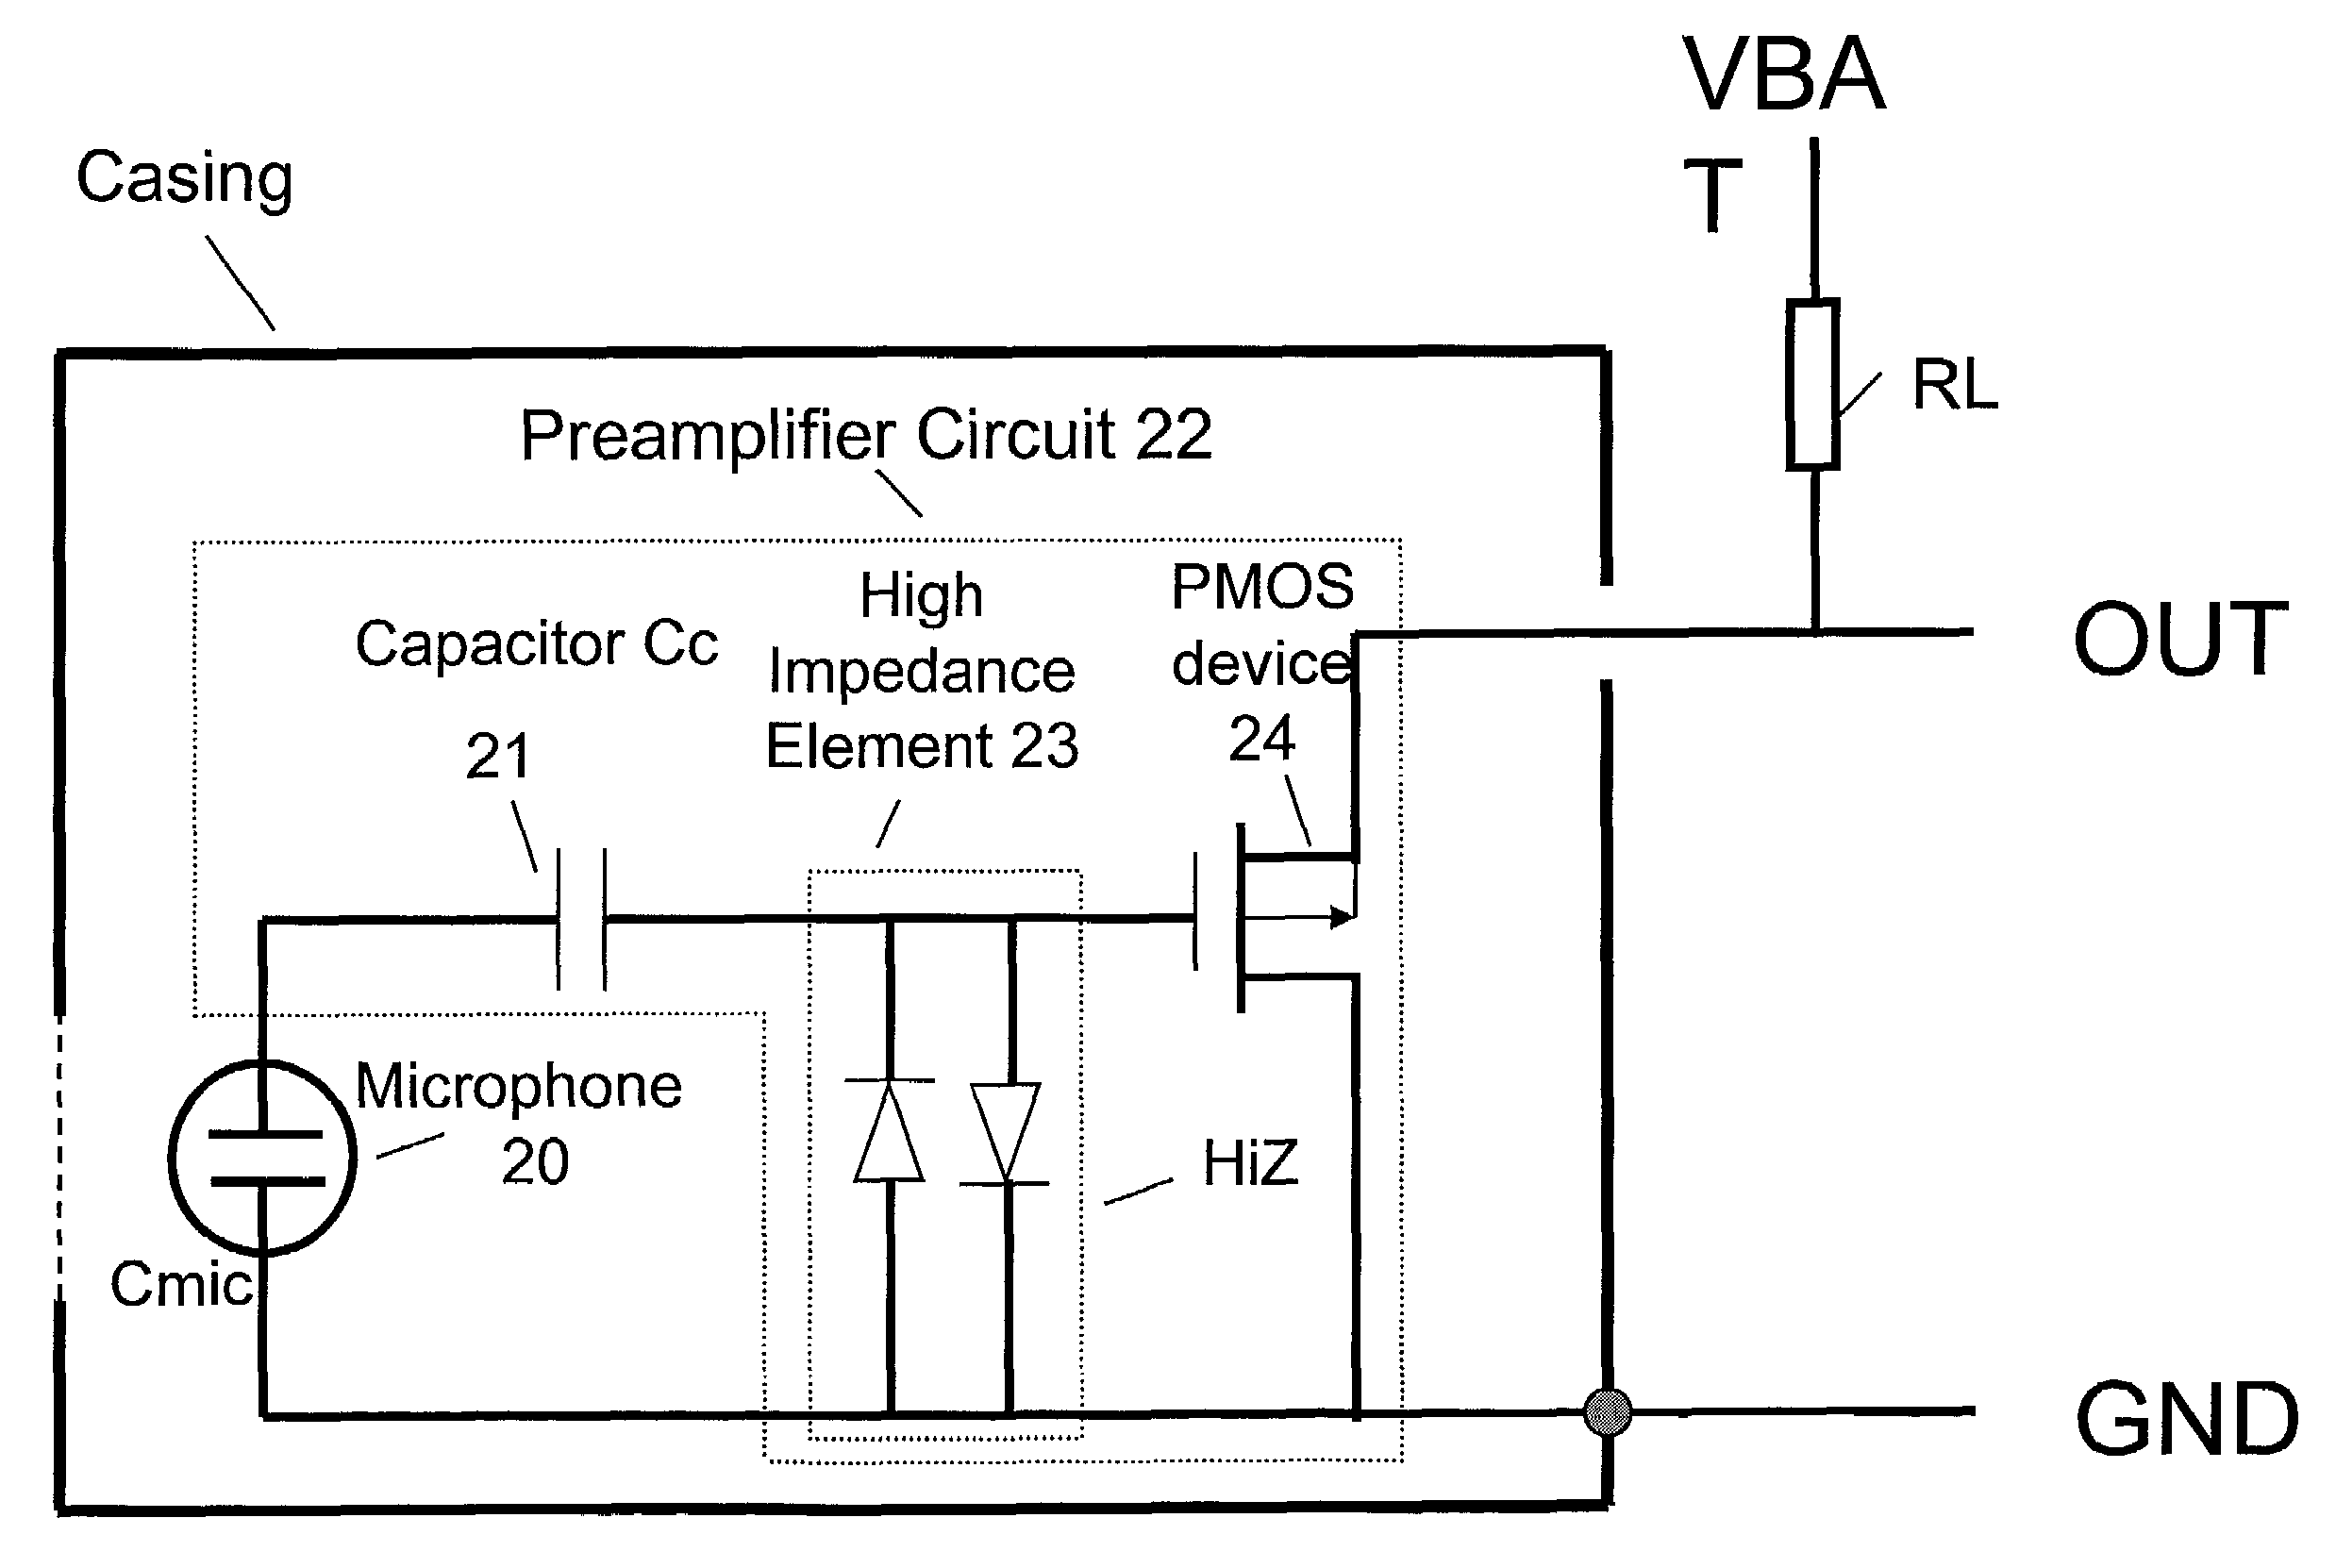 Electret condensor microphone preamplifier that is insensitive to leakage currents at the input